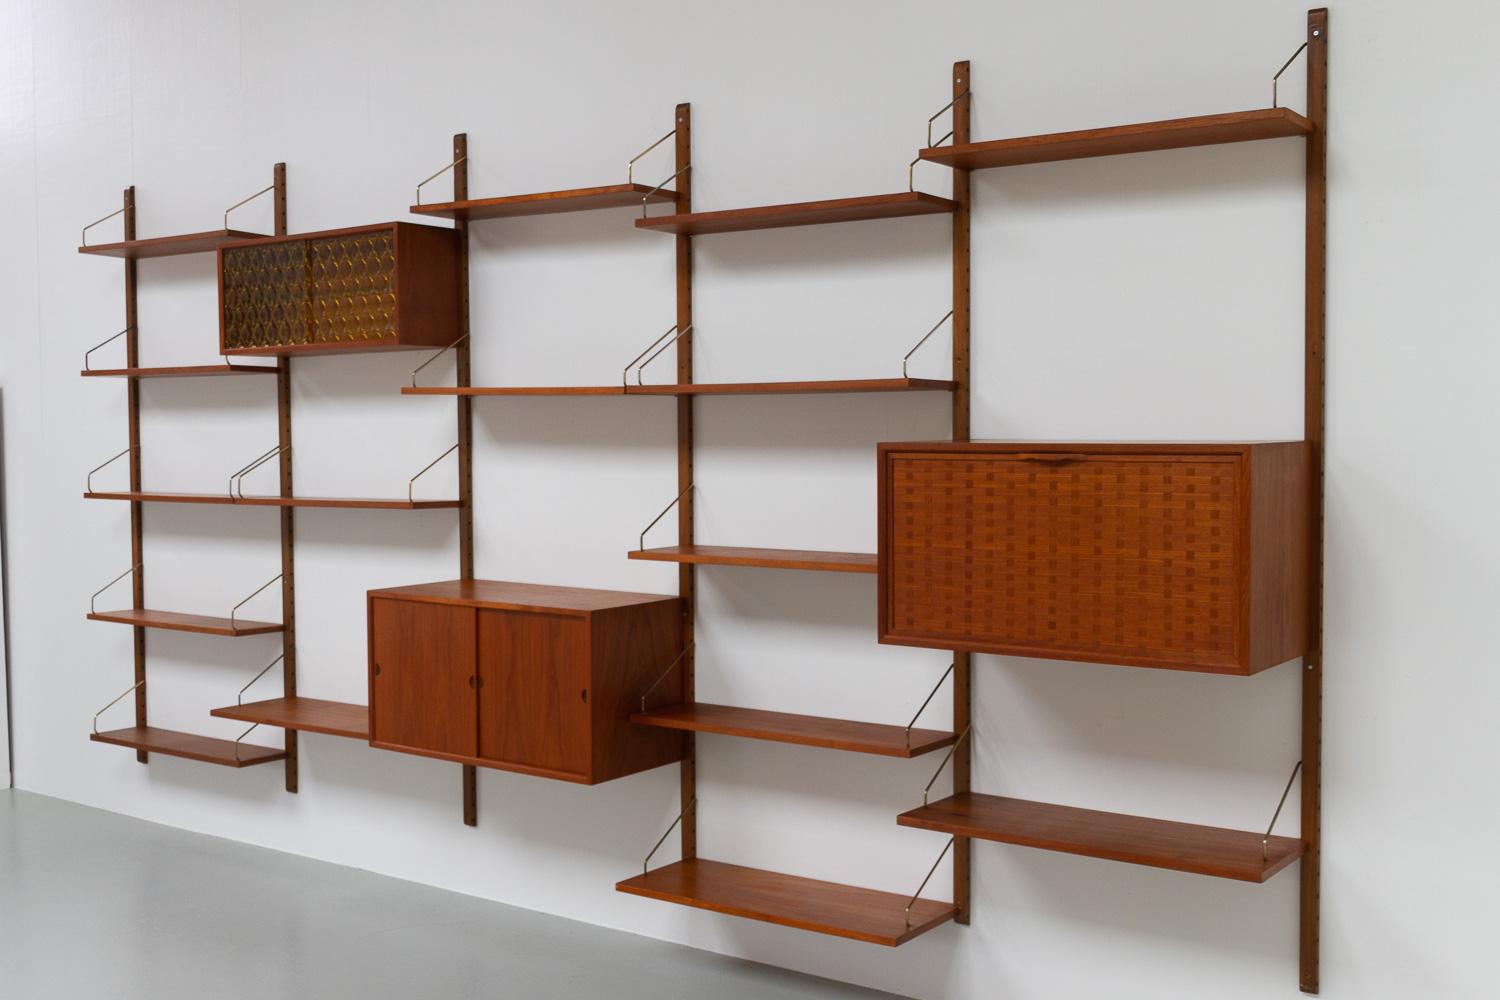 Danish Modern 5-Bay Modular Teak Wall Unit by Poul Cadovius for Cado, 1950s.

Mid-Century Modern 5 bay shelving system model Royal. This is an original vintage floating bookcase designed in 1948 by Danish architect Poul Cadovius. 
Cadovius had the